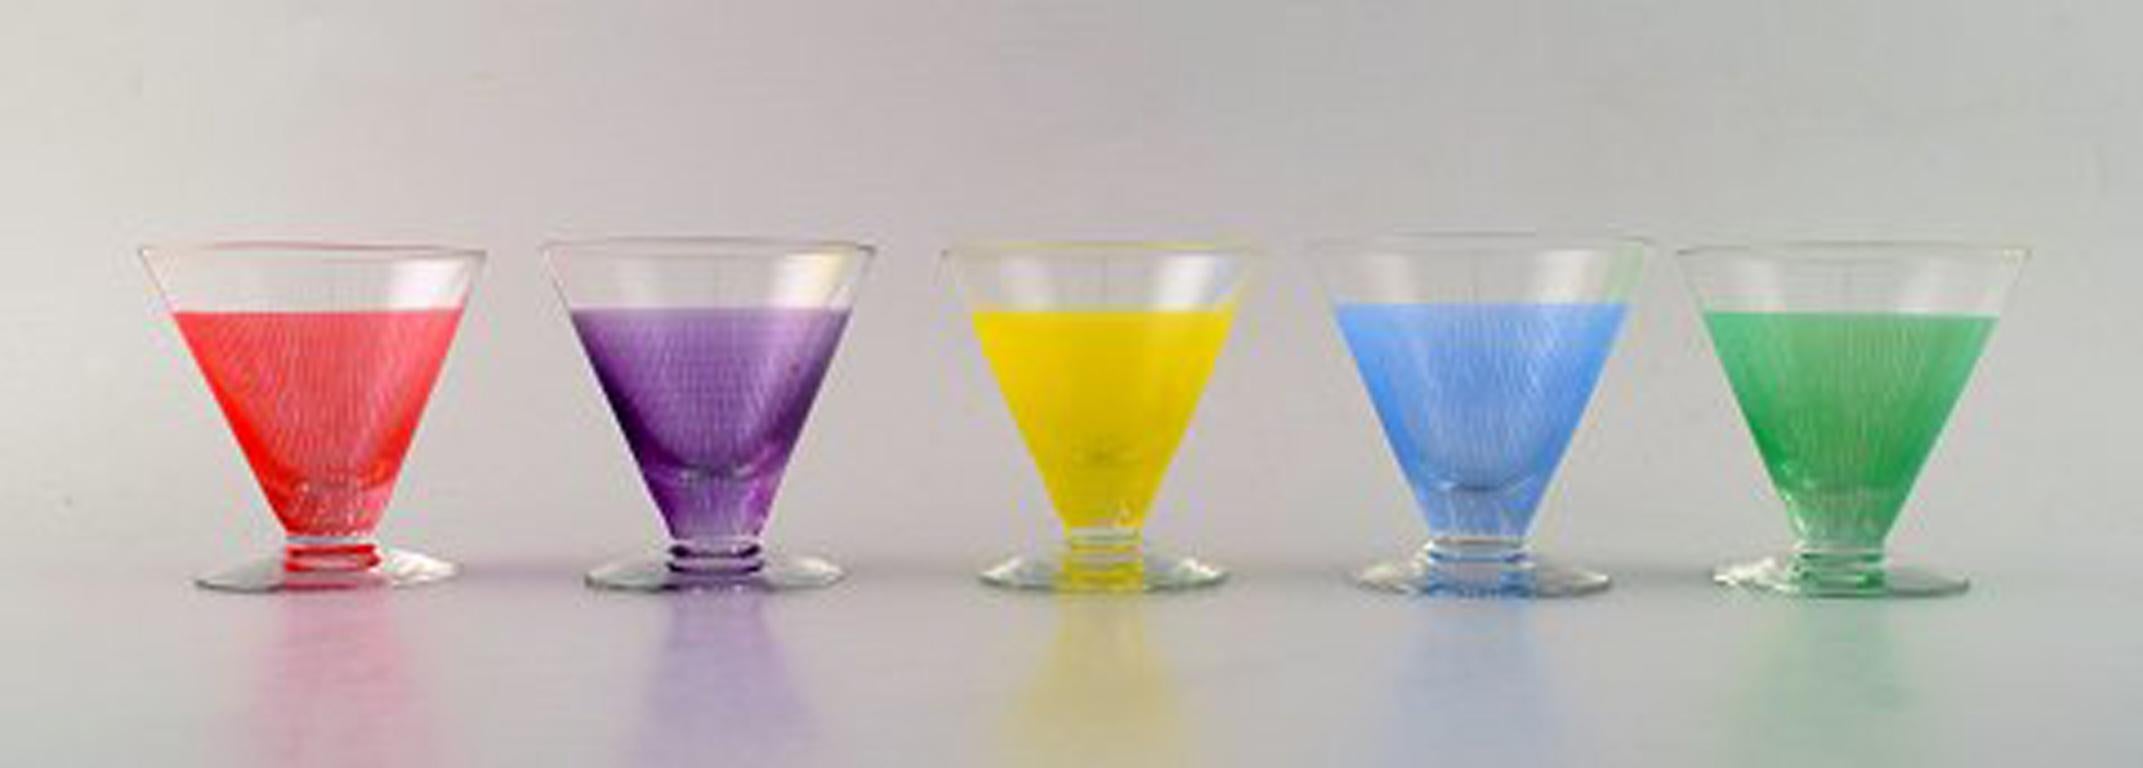 8 colorful cocktail glasses with decanter/bottle. 